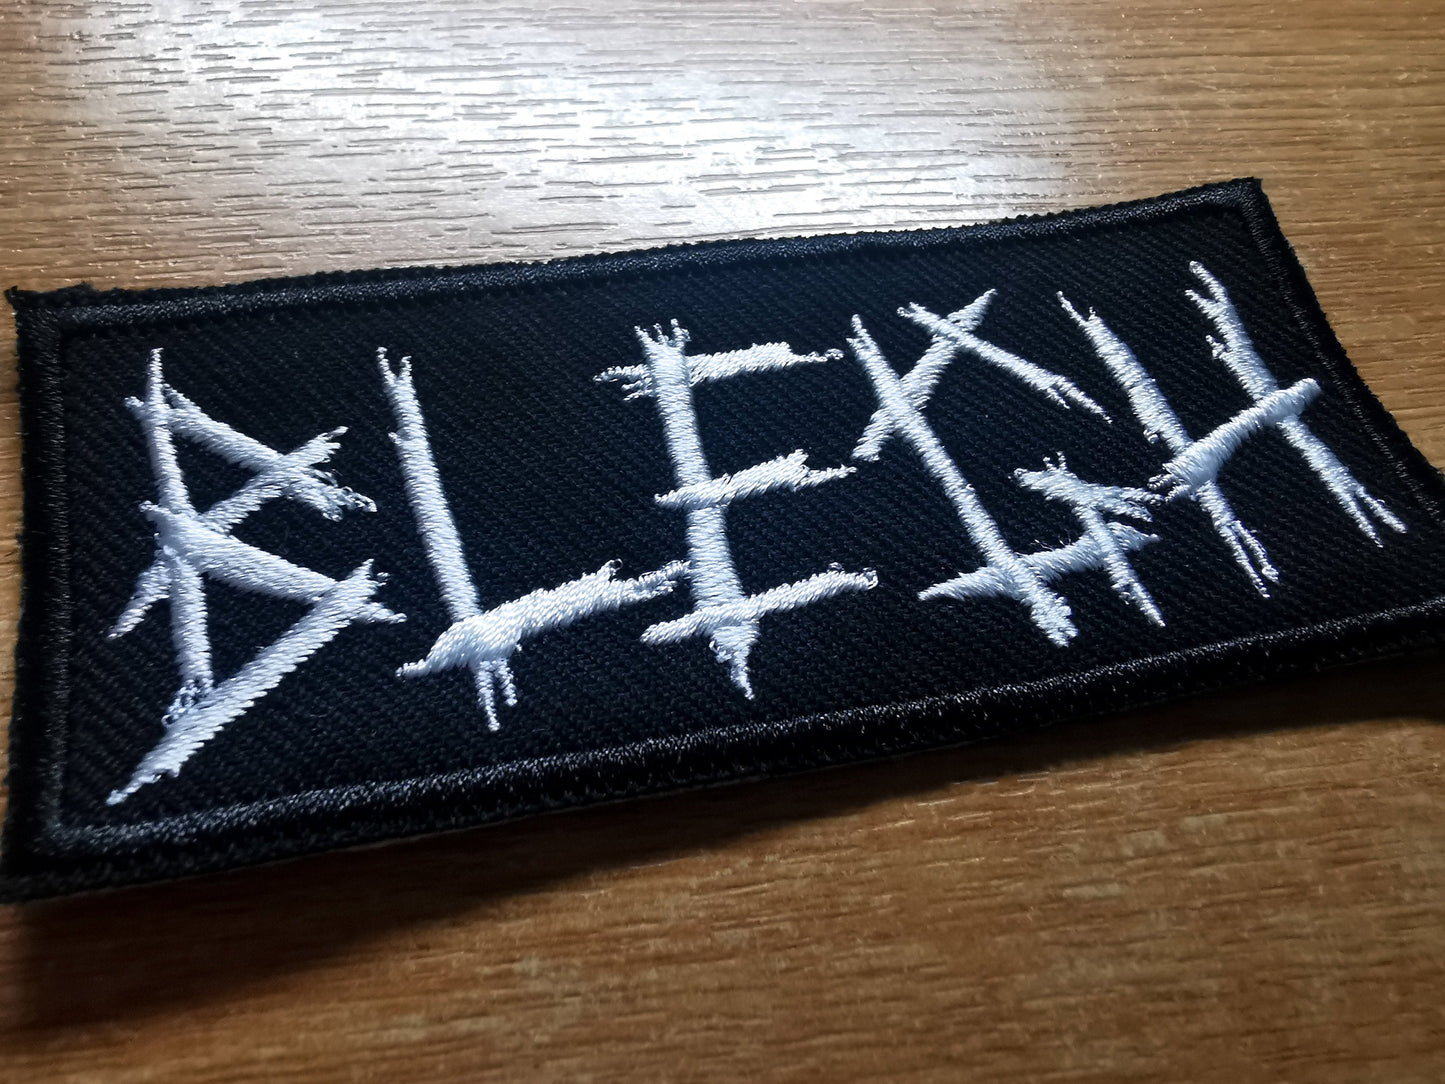 Blegh Metalcore Embroidered Patch Metal Breakdown Emo